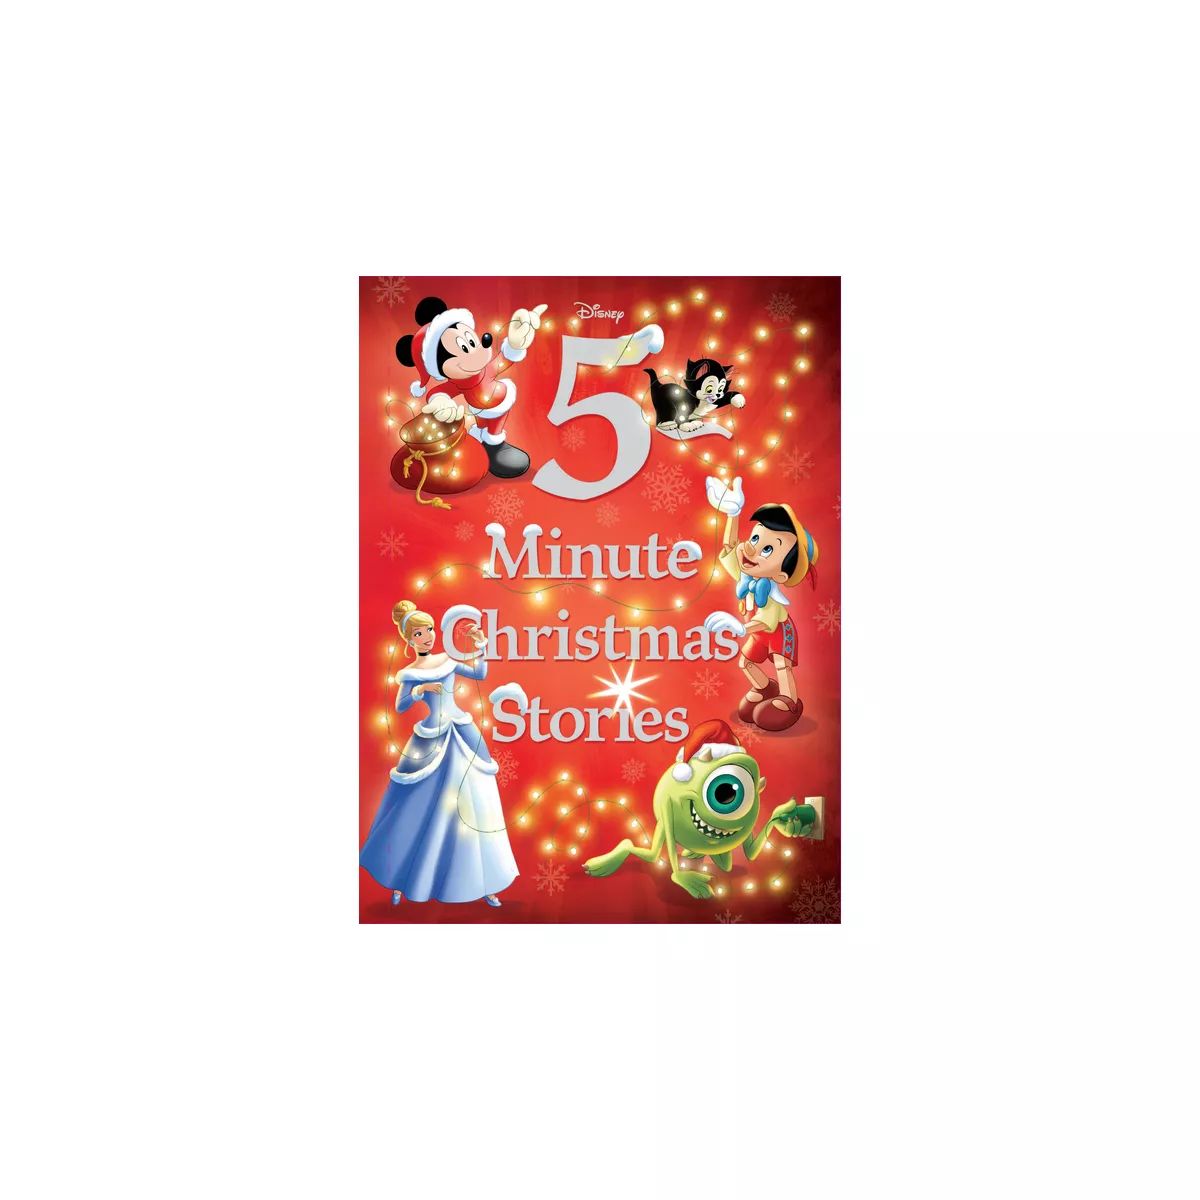 Disney 5-Minute Christmas Stories - by Disney Book Group (Hardcover) | Target